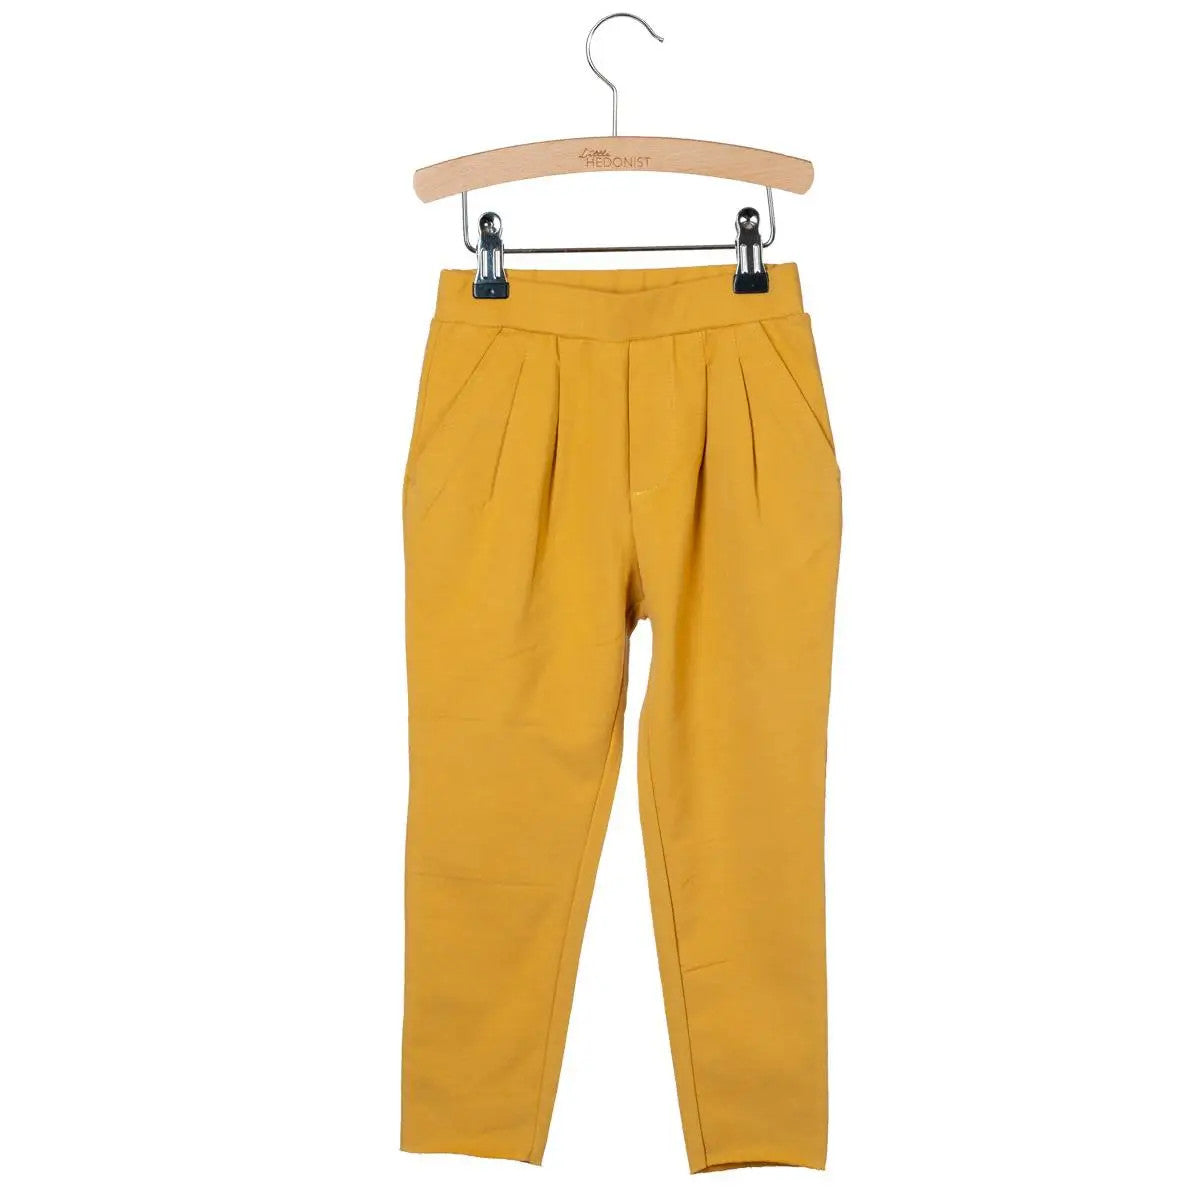 Little Hedonist organic pleated pants with side pockets in warm gold